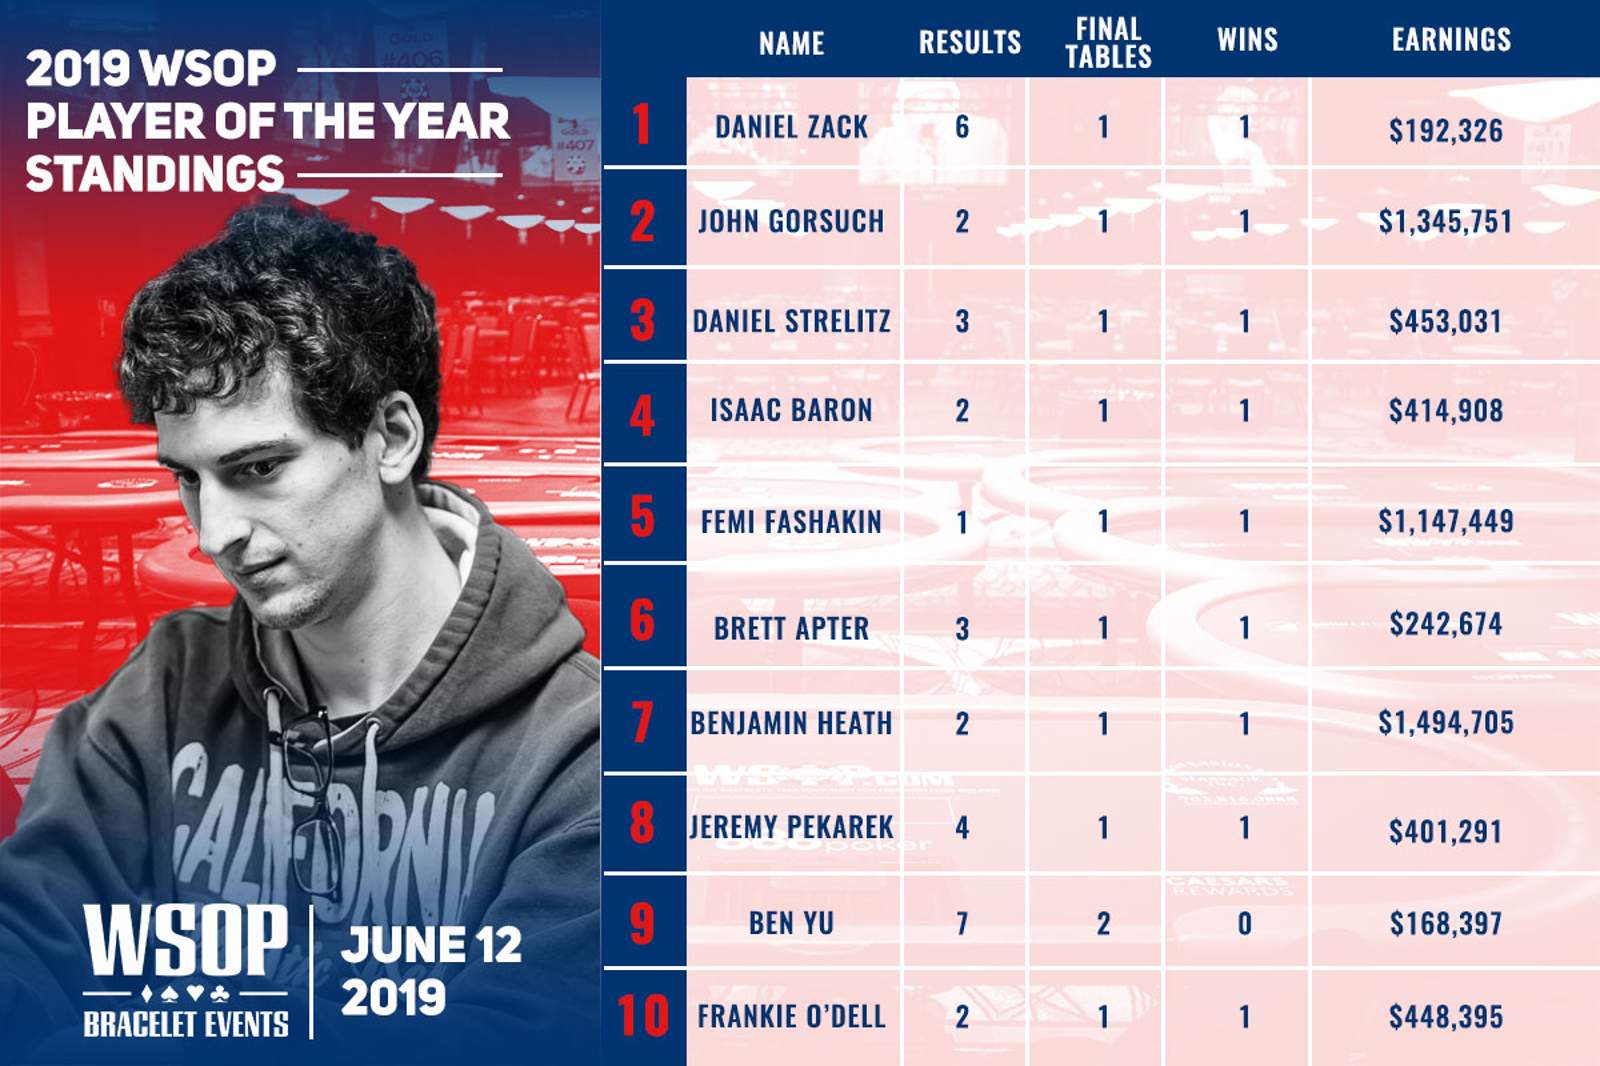 Dan Zack Maintains 2019 WSOP Player of the Year Lead with 25 Events in the Books